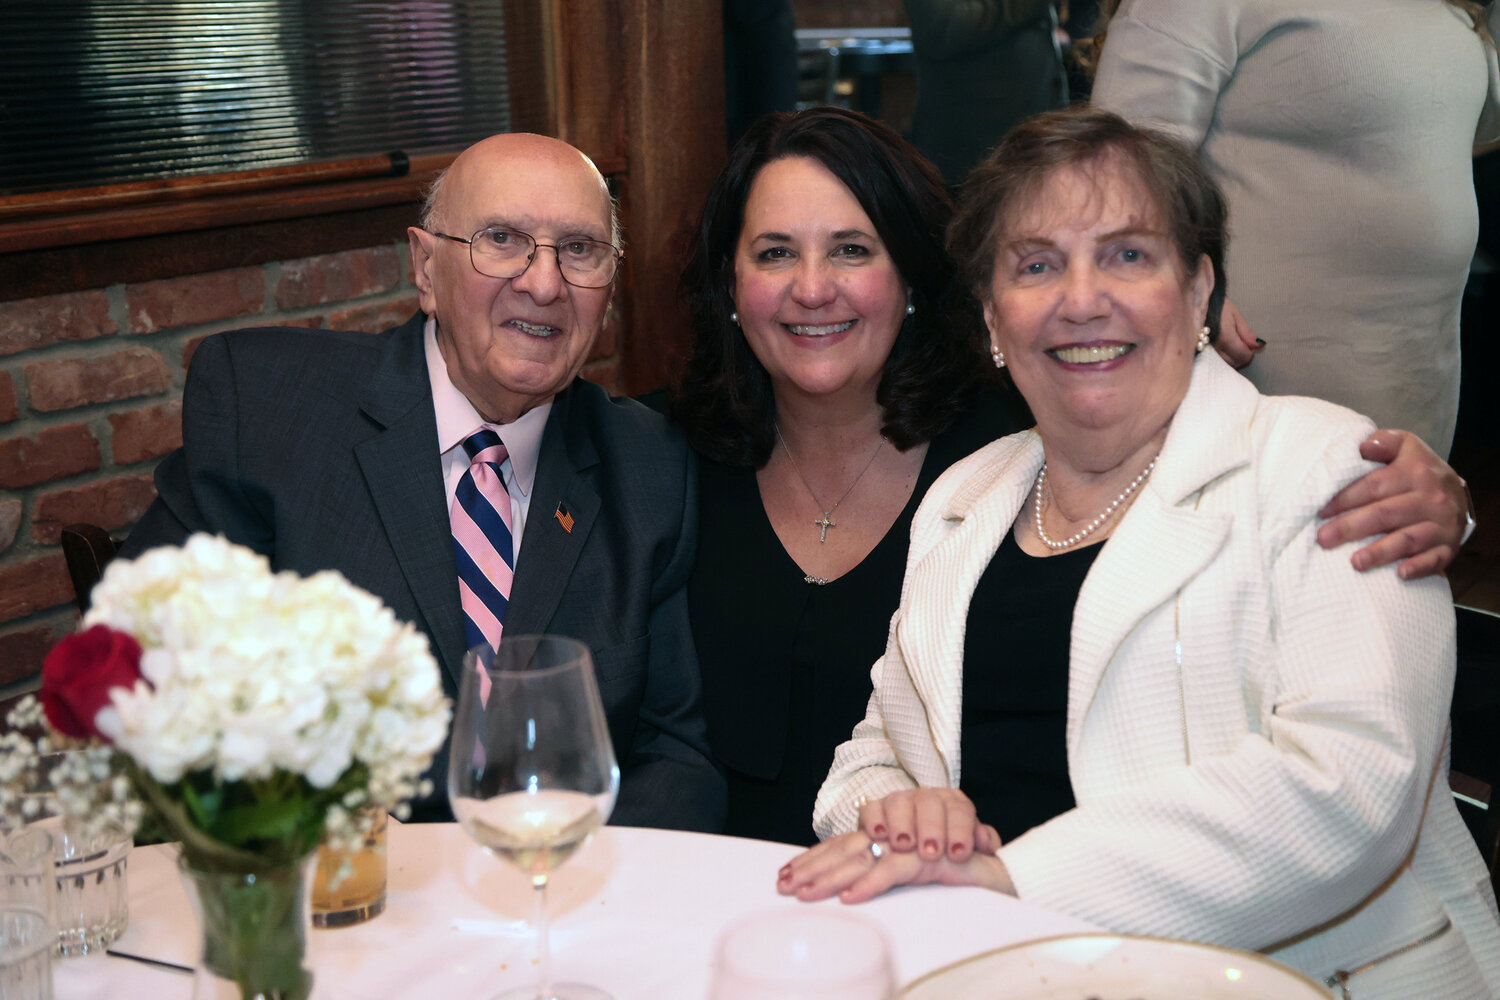 Joseph Canzoneri and his wife, Judith (née Deller), have shared 60 years of marriage. They have six children, including State Sen. Patricia Canzoneri-Fitzpatrick, and thirteen grandchildren.